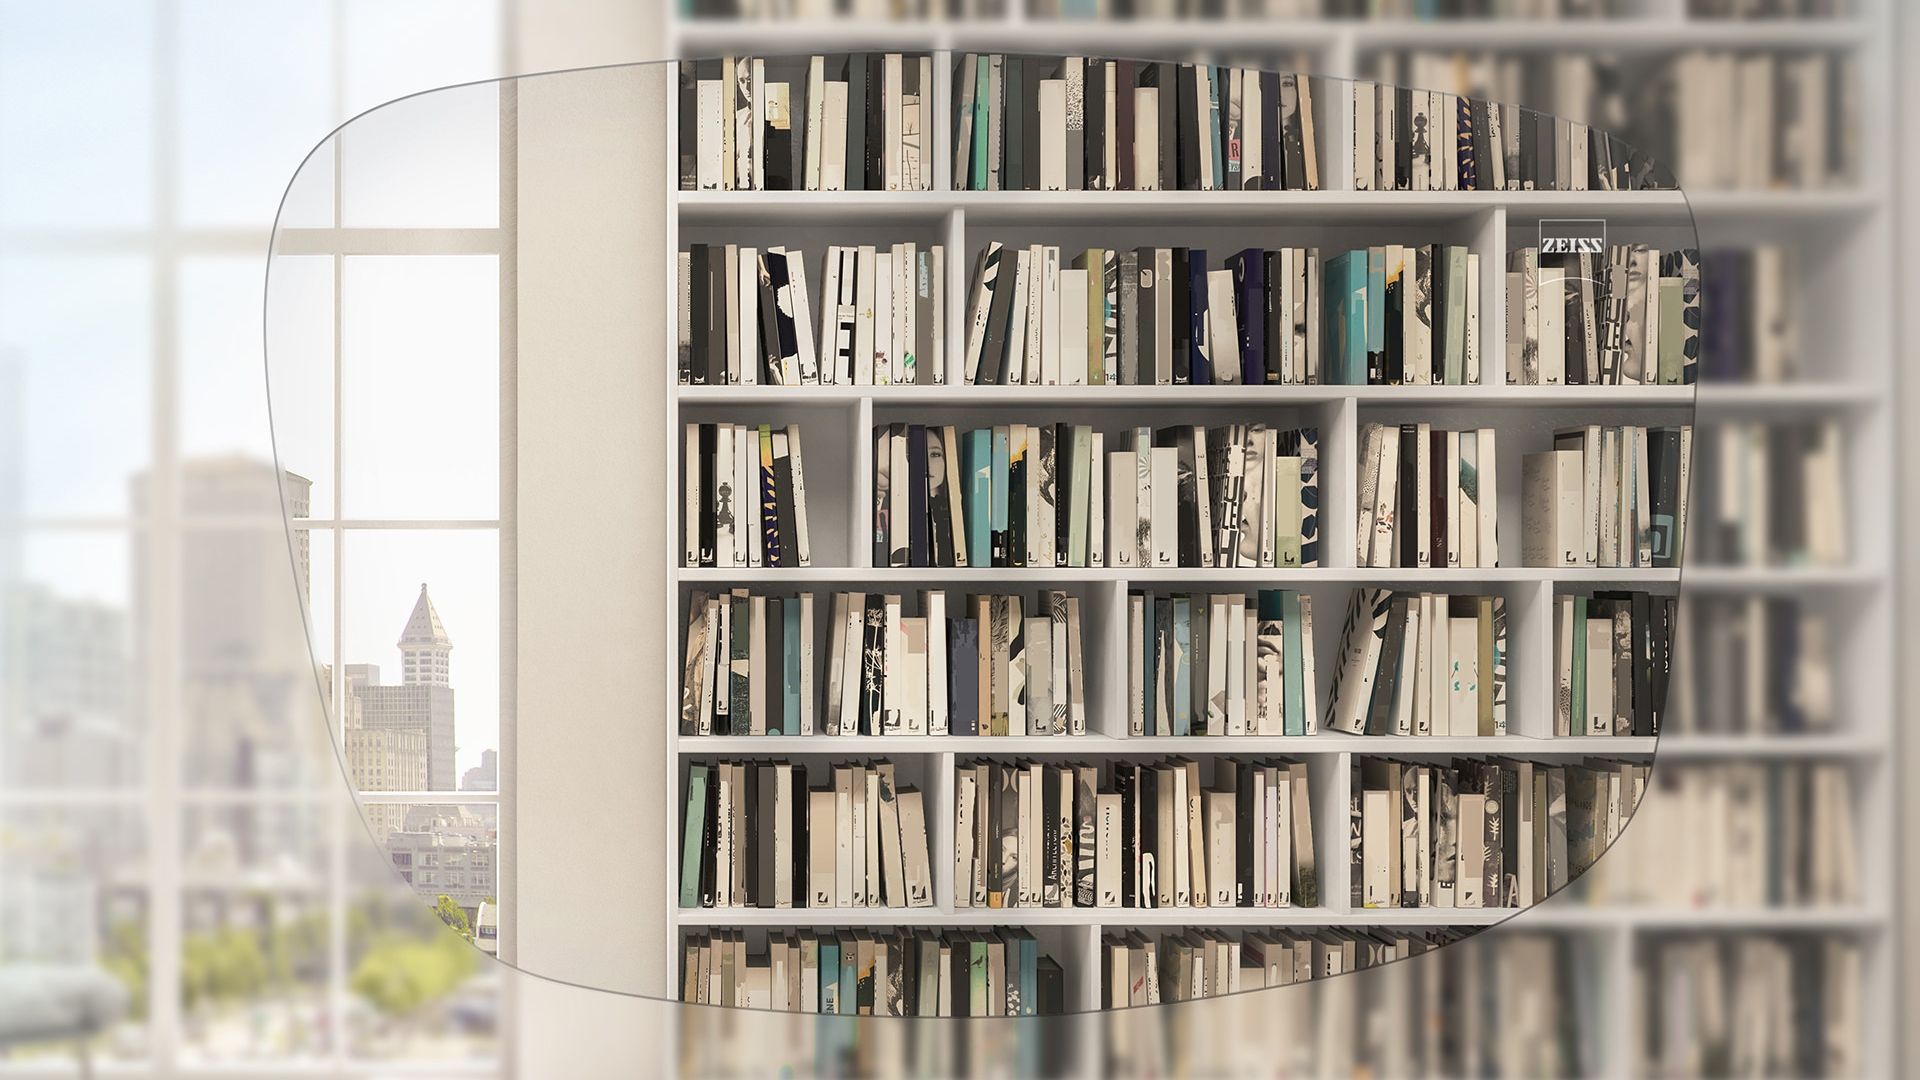 View of a book shelf and window through a ZEISS Single Vision Individual lens 